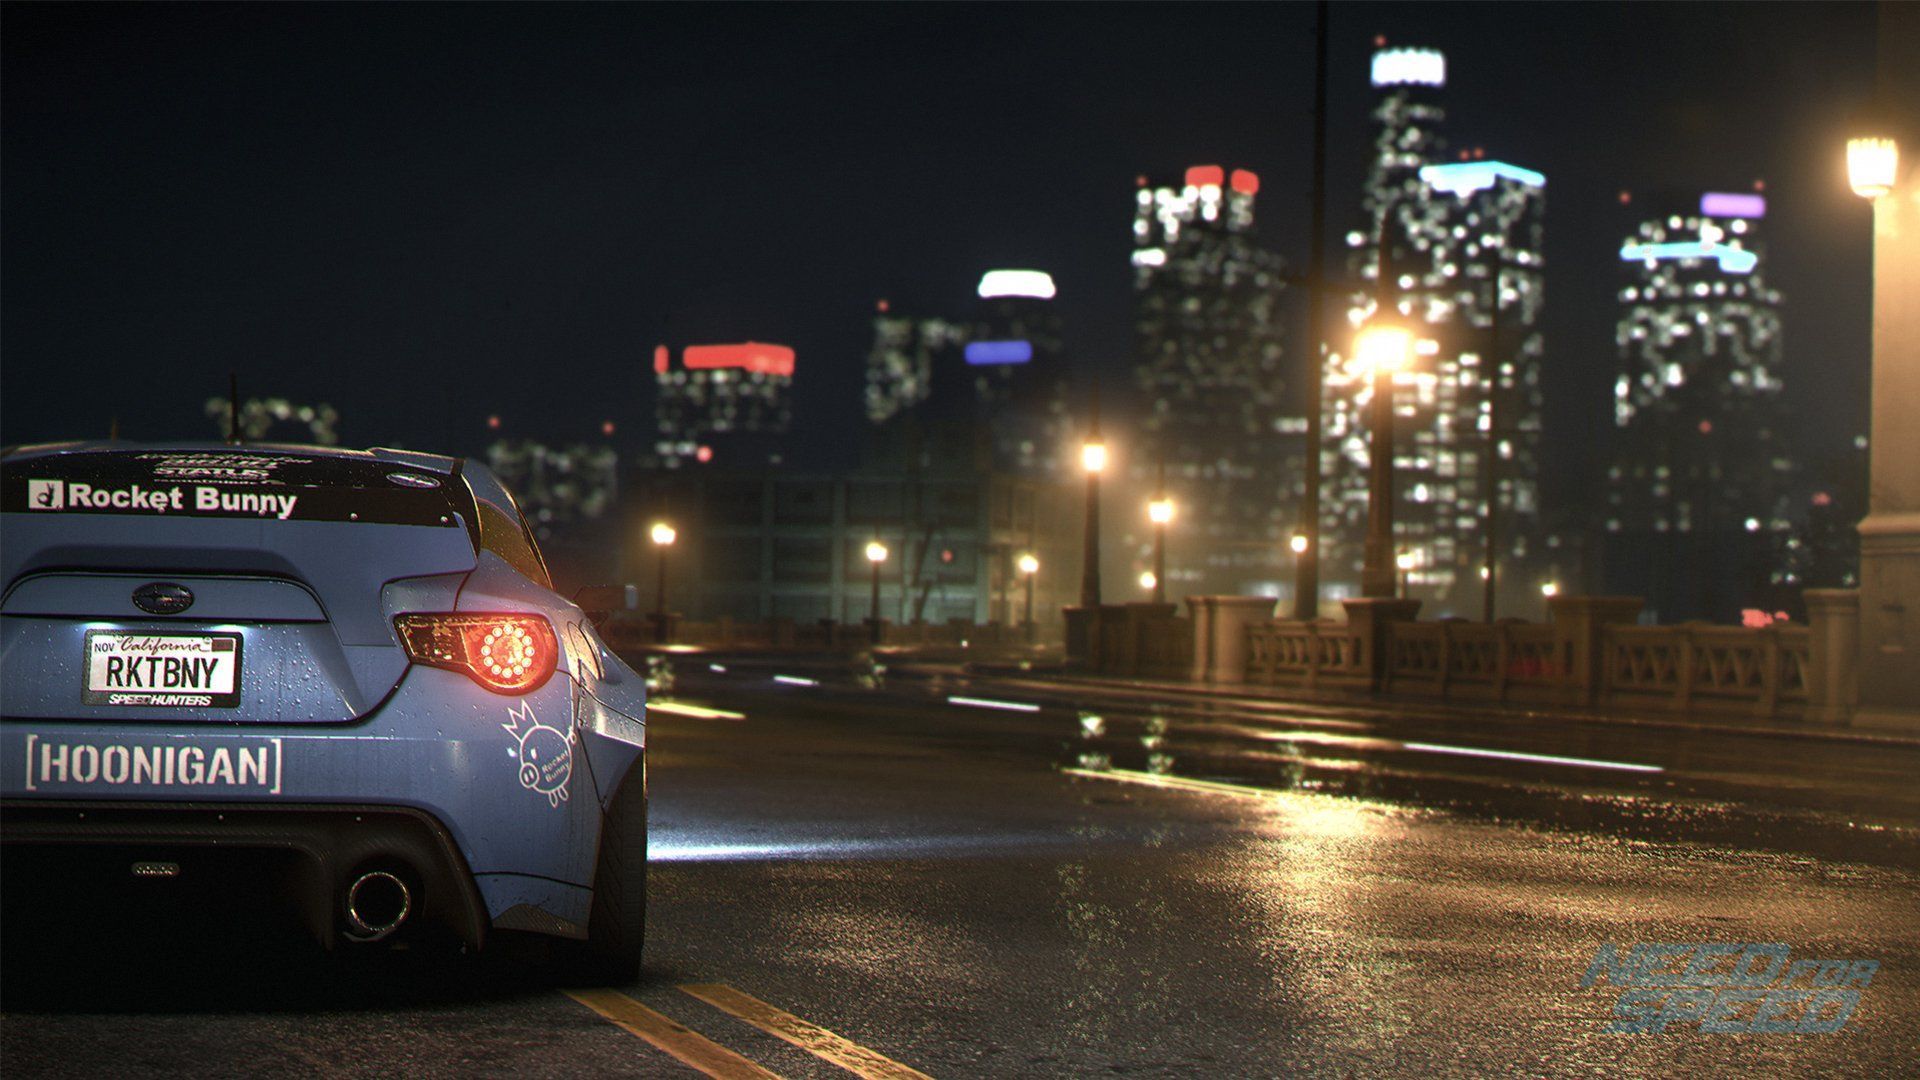 Need for Speed HD Wallpaper Background Wallpaper. Need for speed, Need for speed cars, Subaru brz